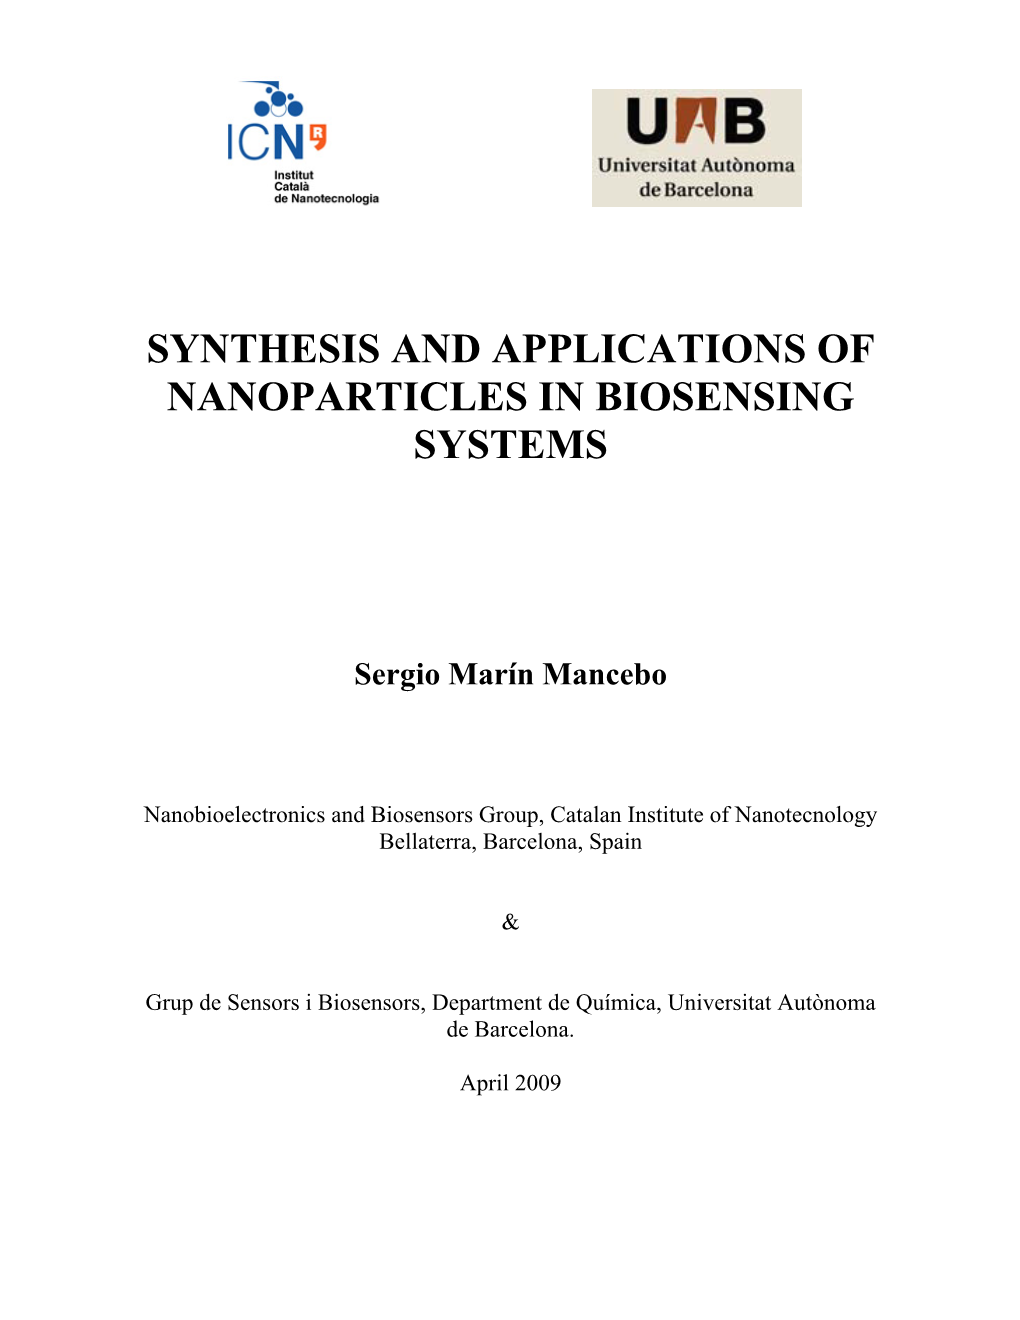 Synthesis and Applications of Nanoparticles in Biosensing Systems